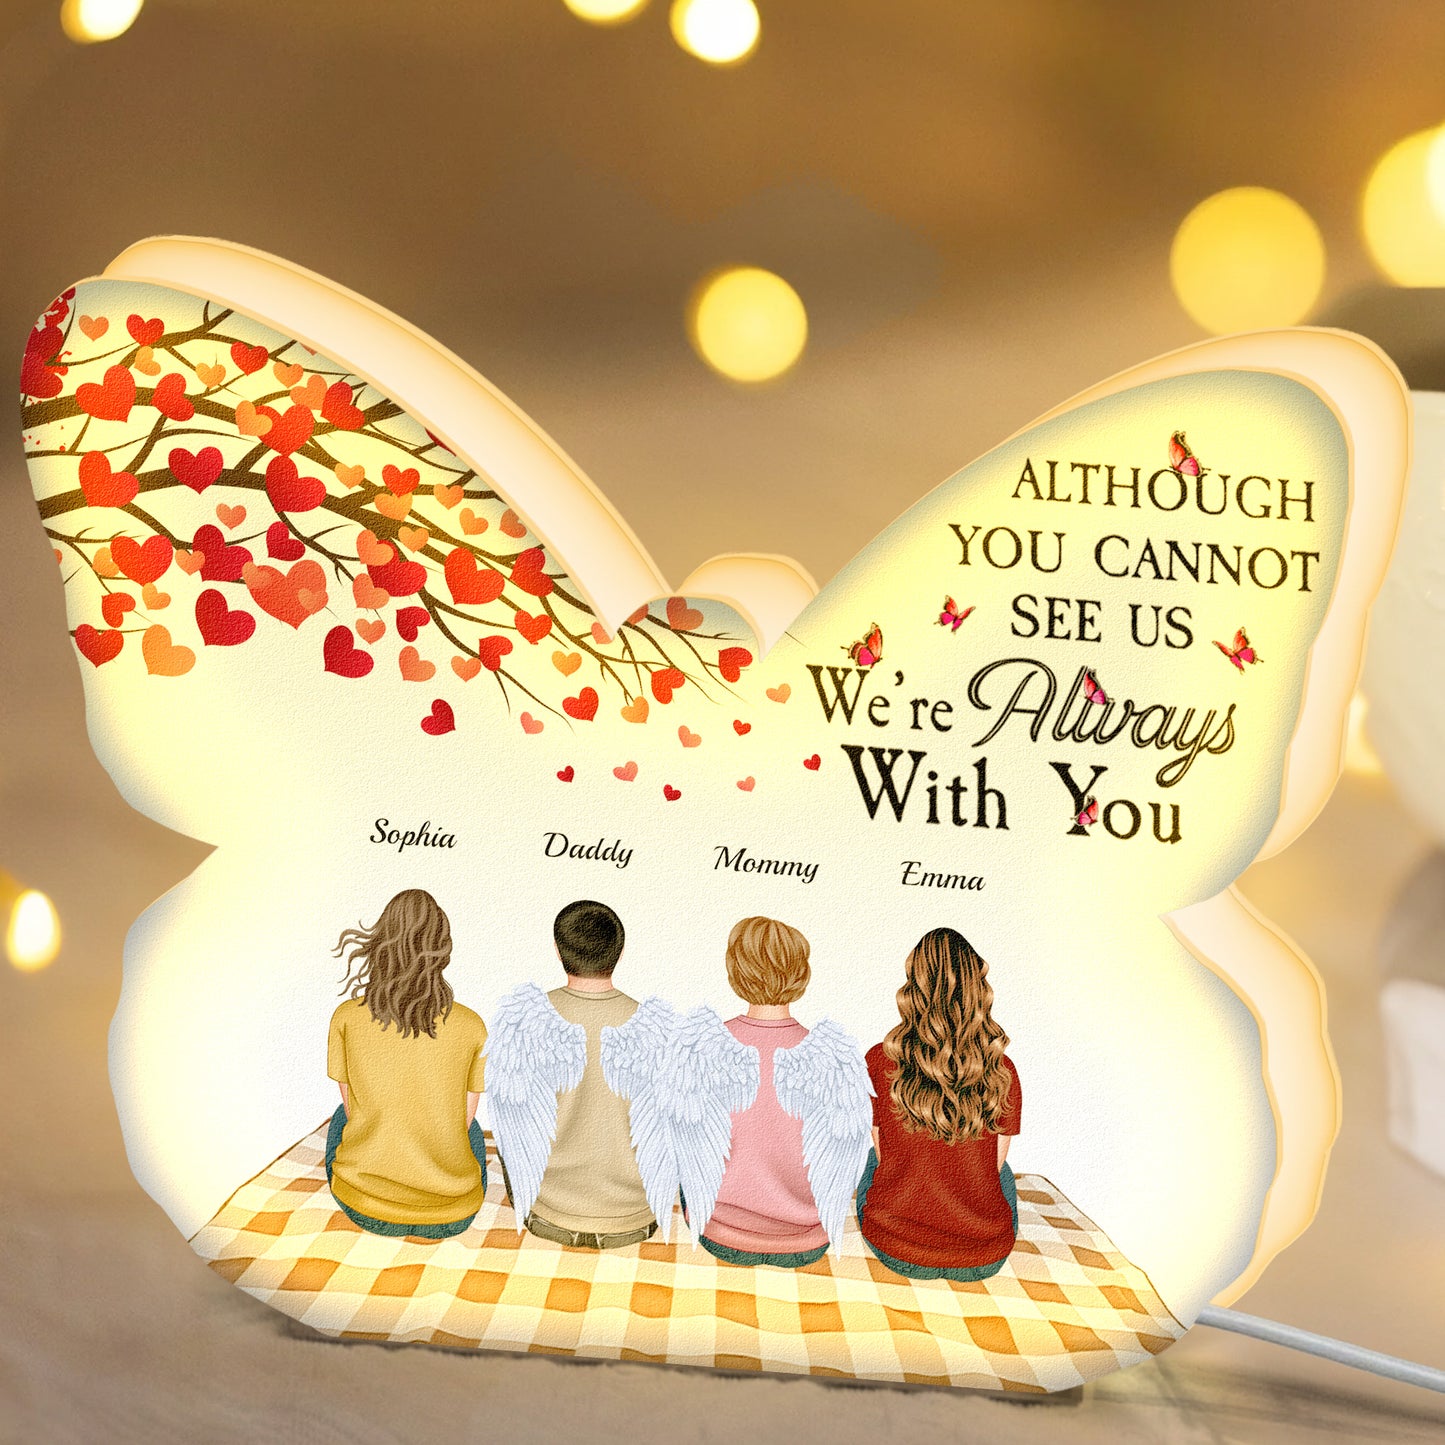 Although You Cannot See Us We're Always With You - Personalized Light Box